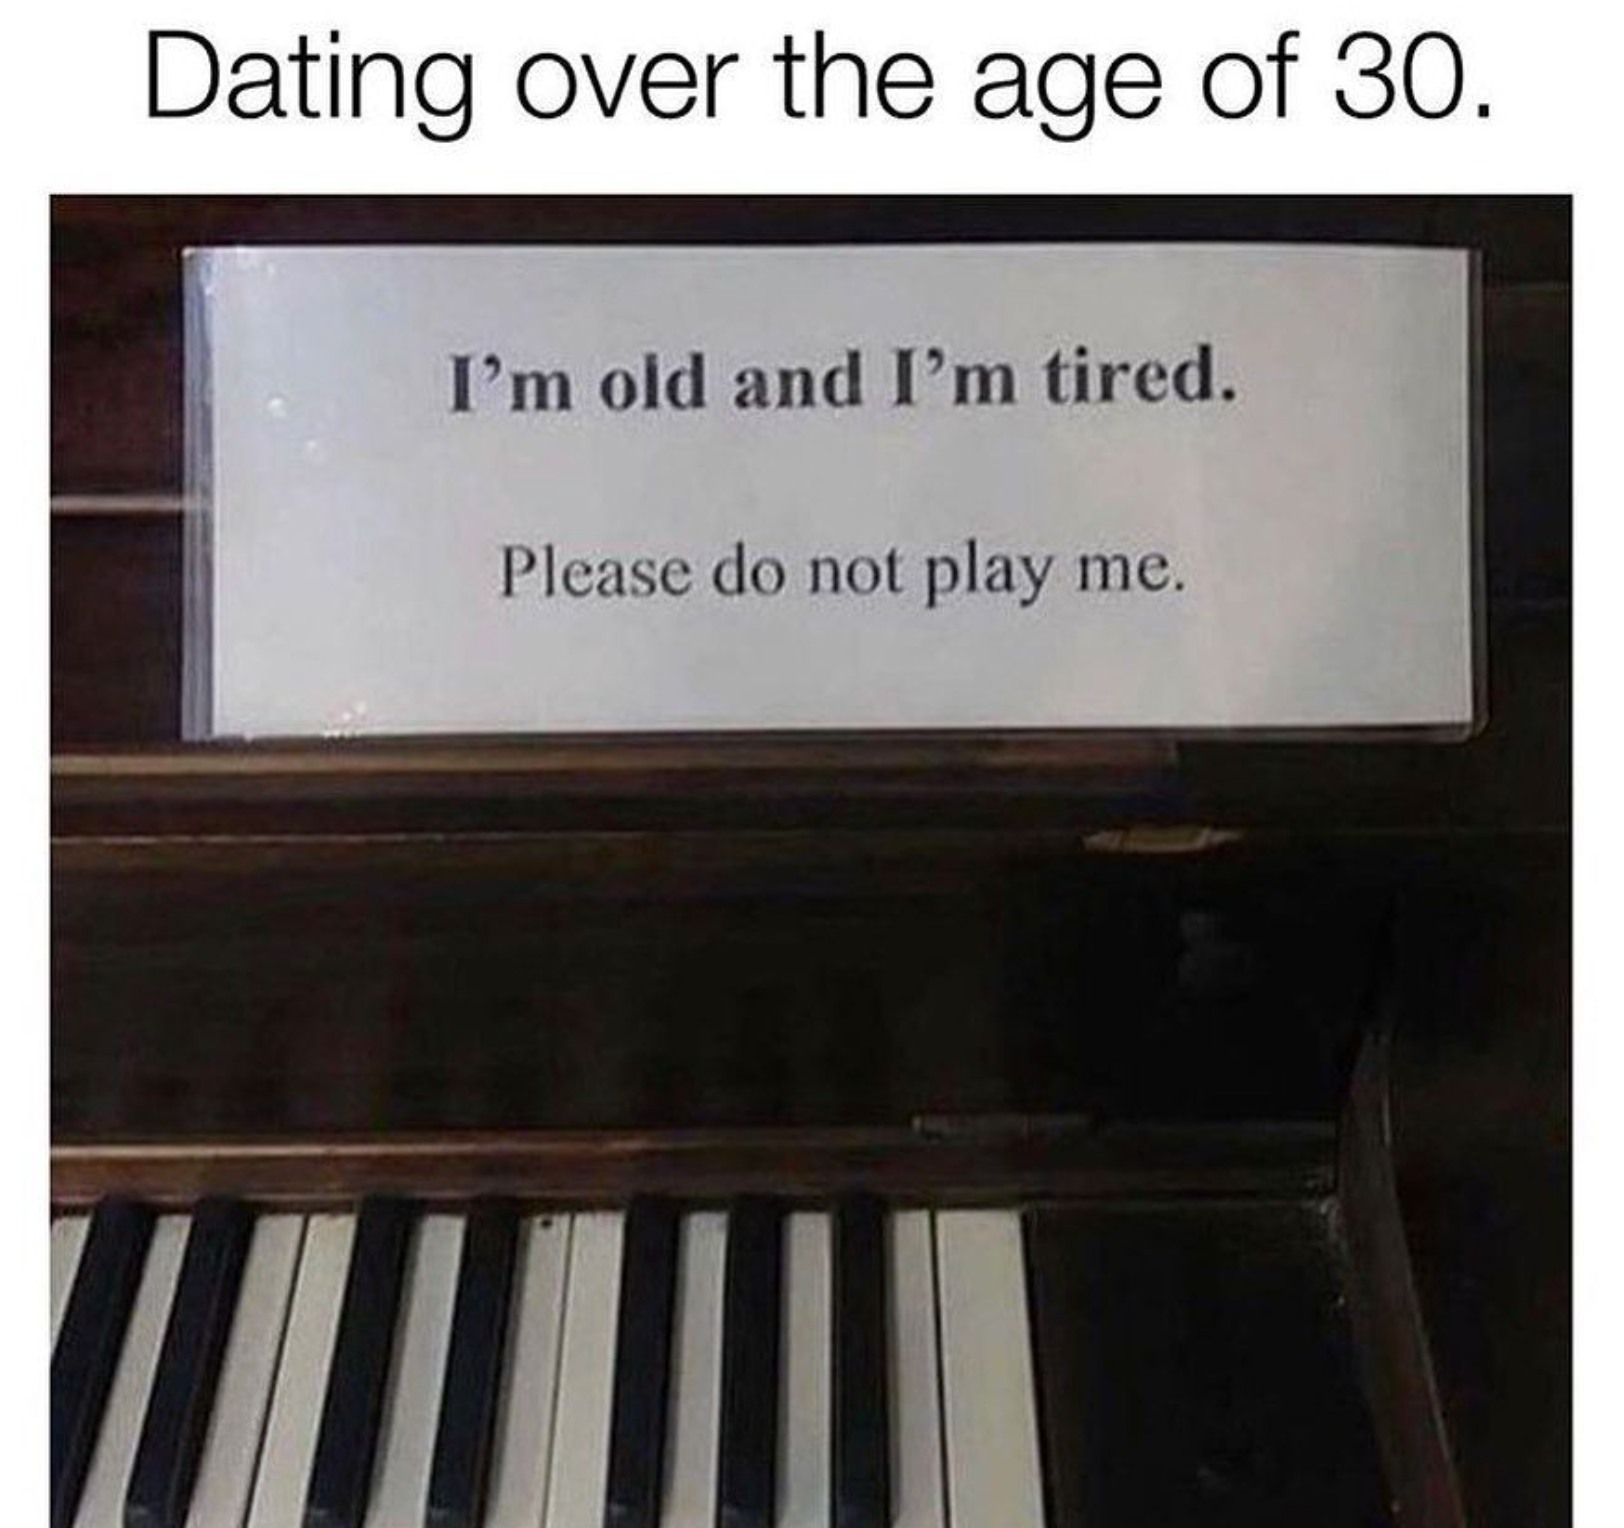 i'm old and i am tired, please do not play me, dating over the age of 30